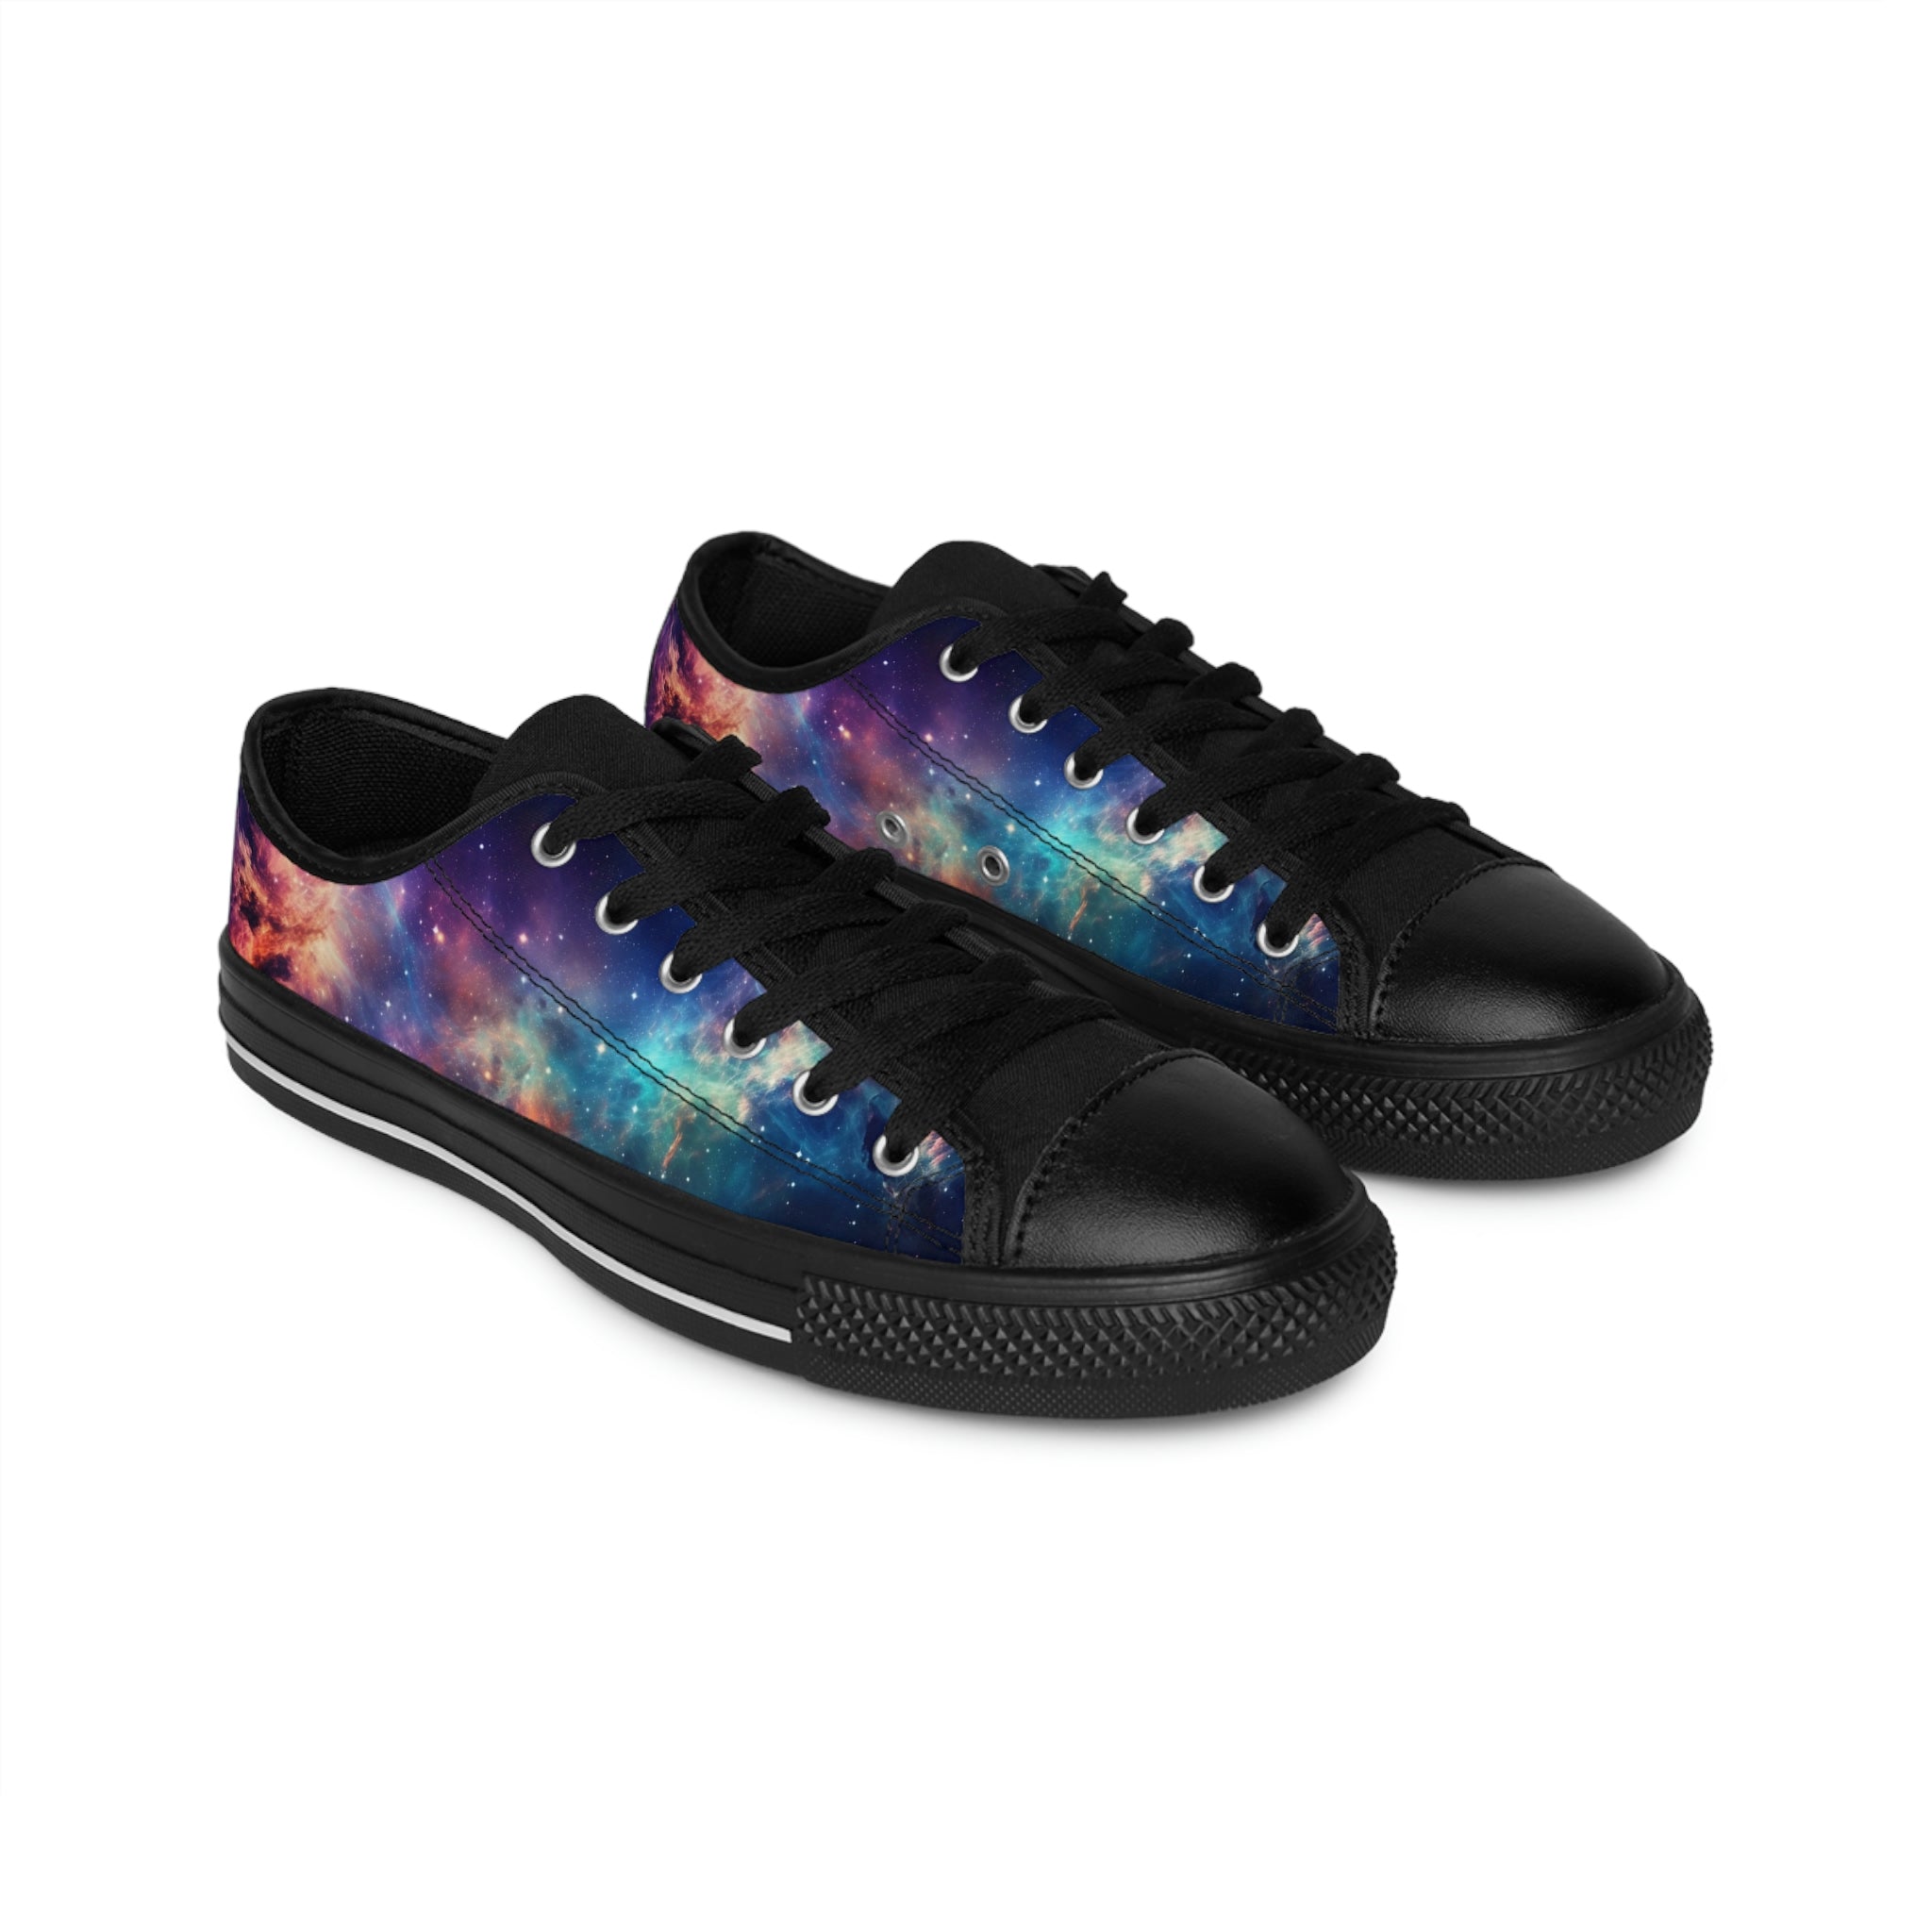 Men's Galactic Glimmer Low Top Shoes